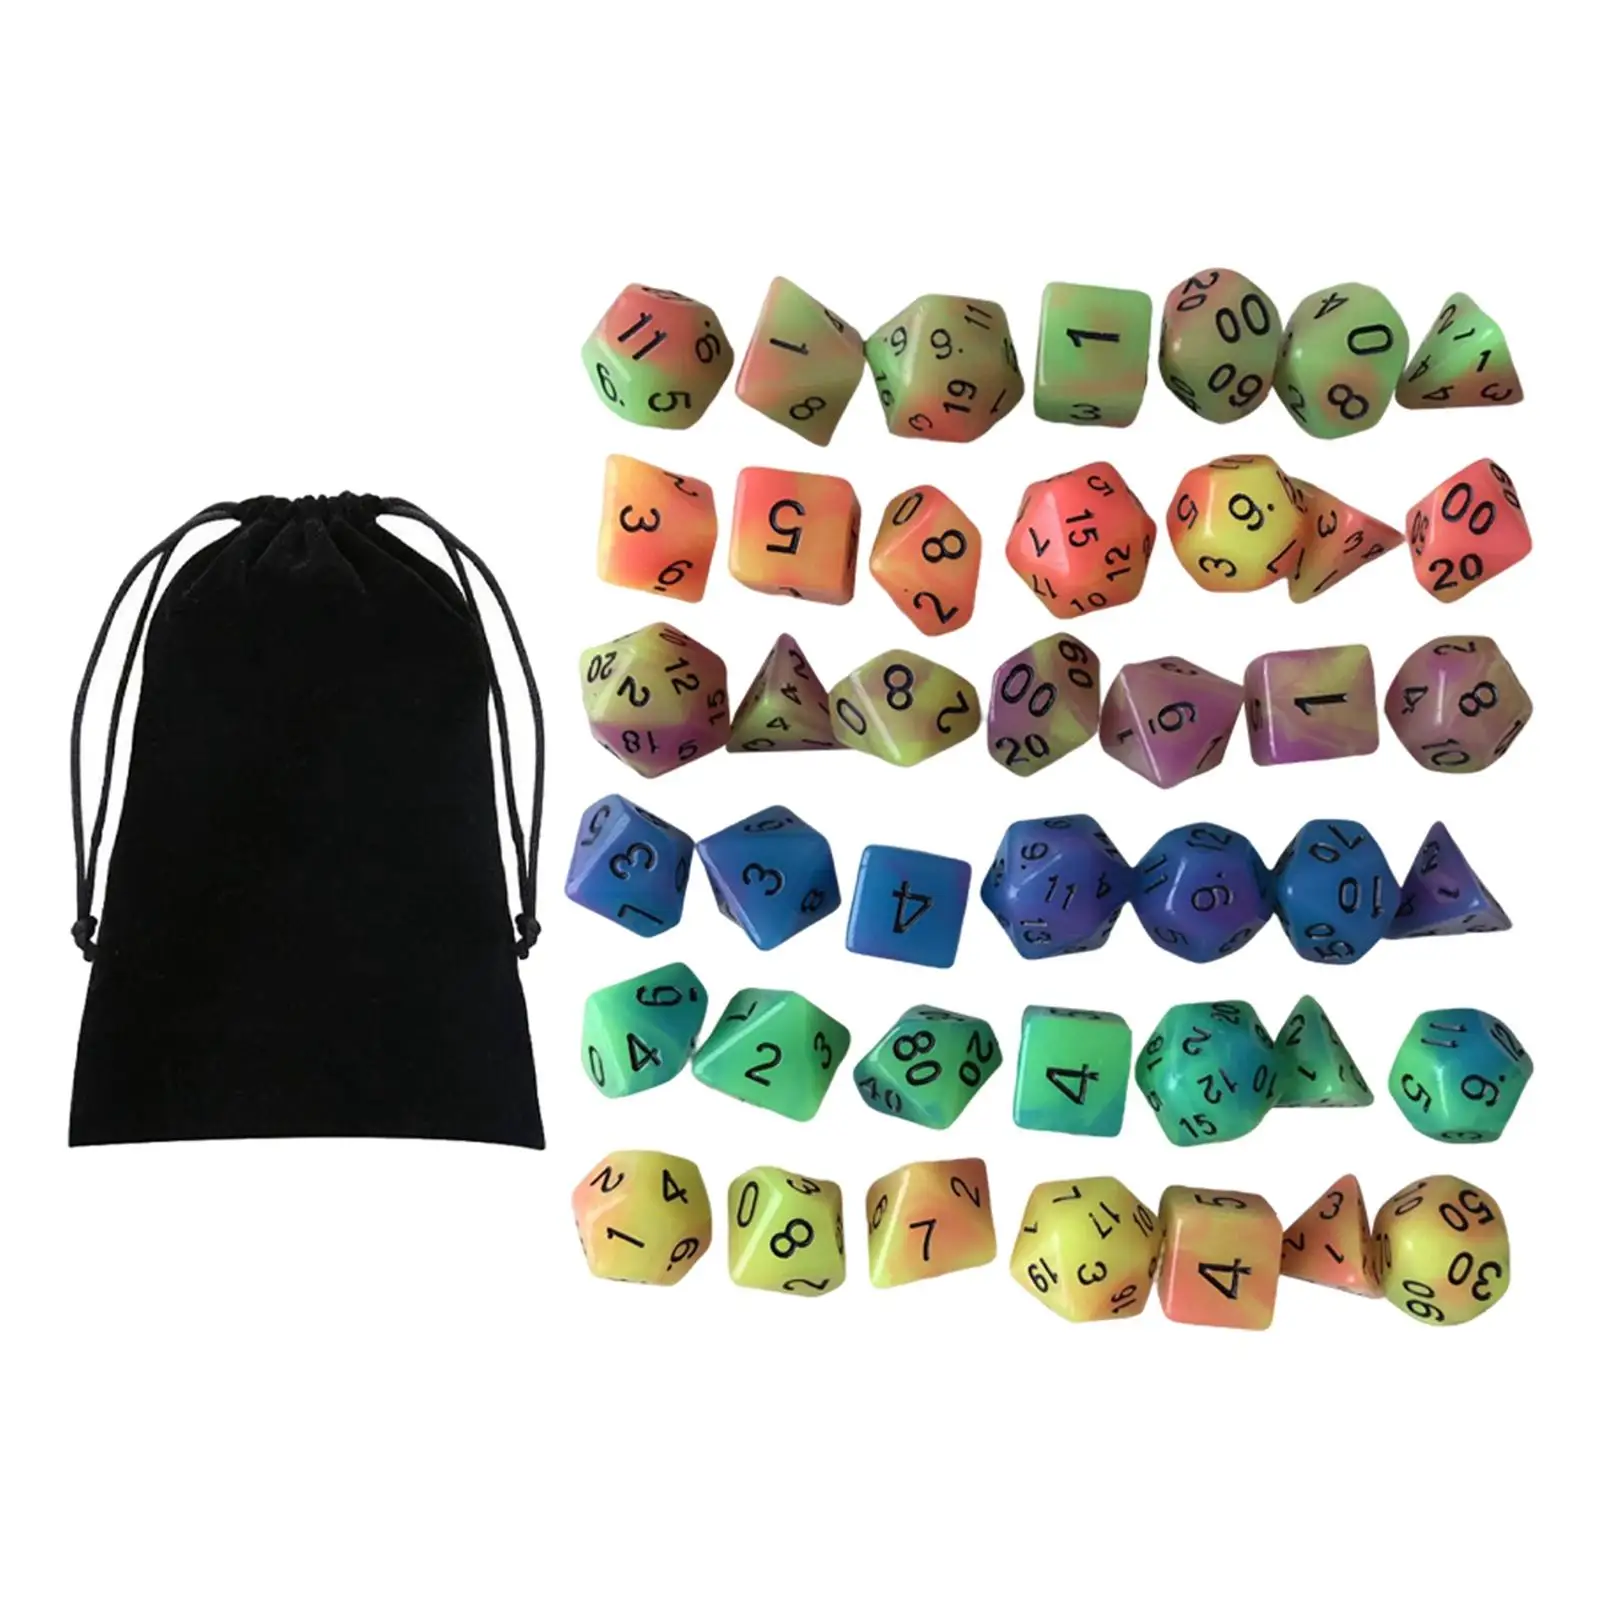 Acrylic Luminous RPG Dices Set with Pouch Bar Toys, Polyhedral Dices Set for MTG RPG Board Game Math Teaching